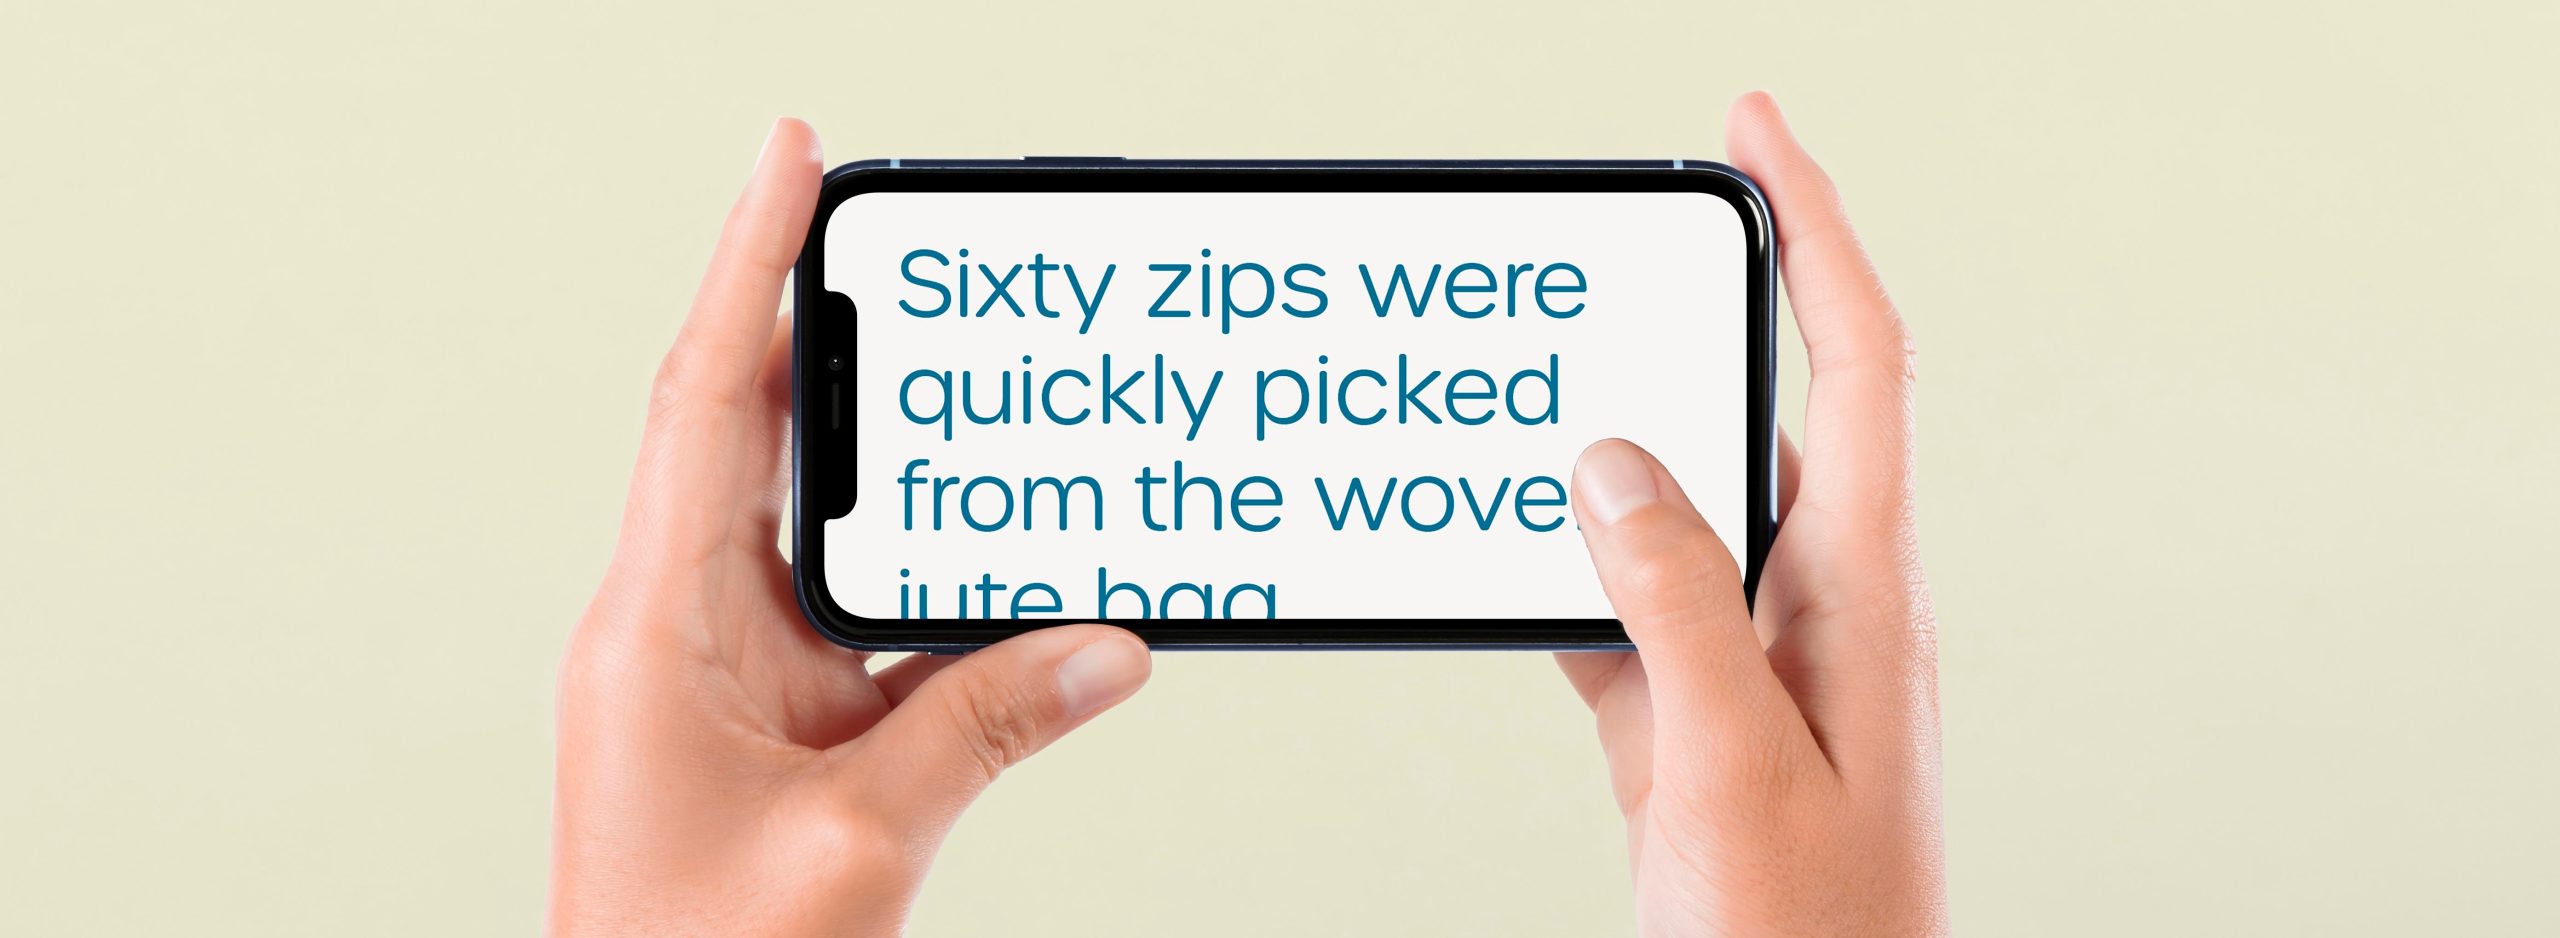 Hands hold up a mobile phone in landscape format. On screen there is large, teal-coloured text on a beige background. The text reads, 'Sixty zips were quickly picked form the woven jute bag.'